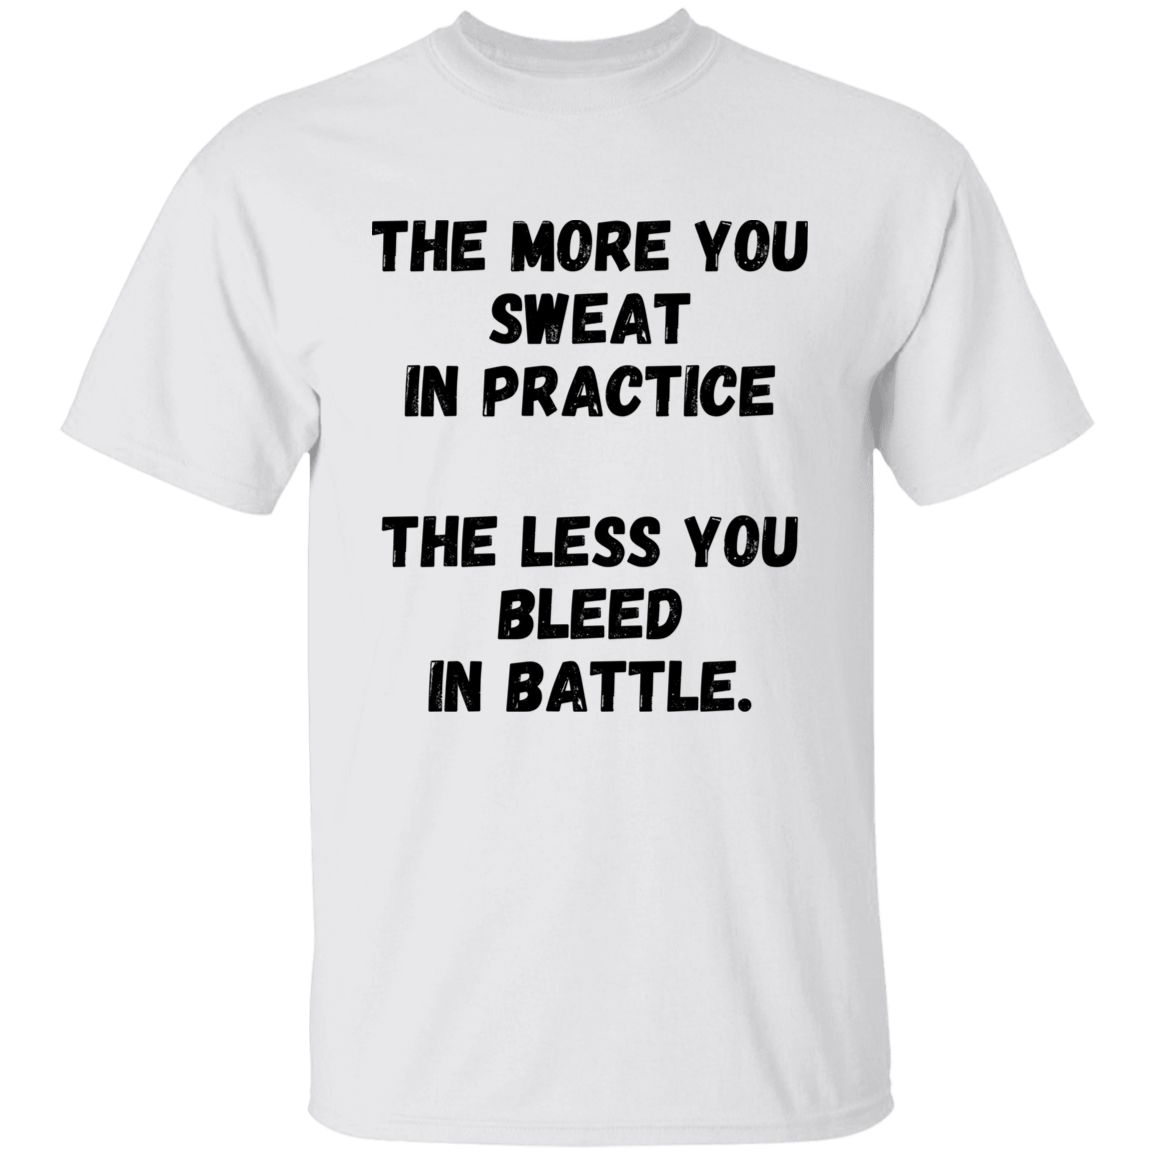 The More You Sweat In Practice, The Less You Bleed In Battle - Boy's, Teen, Youth T-Shirt